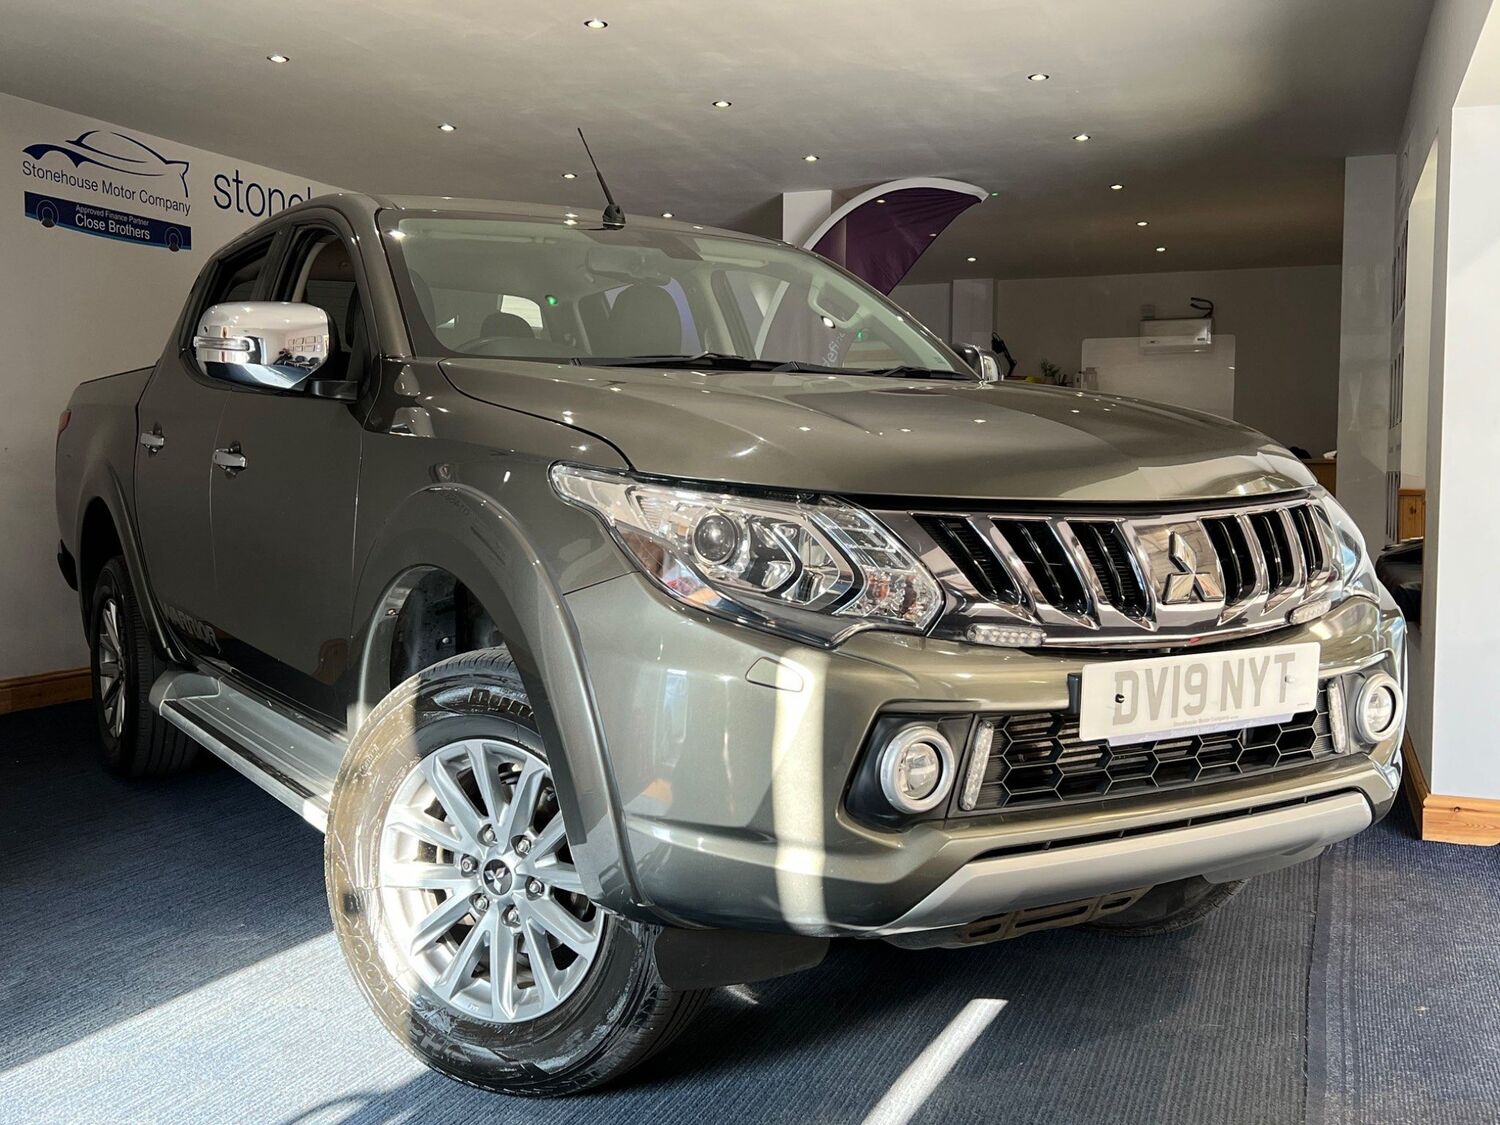 Used MITSUBISHI L200 in Stonehouse, Gloucestershire